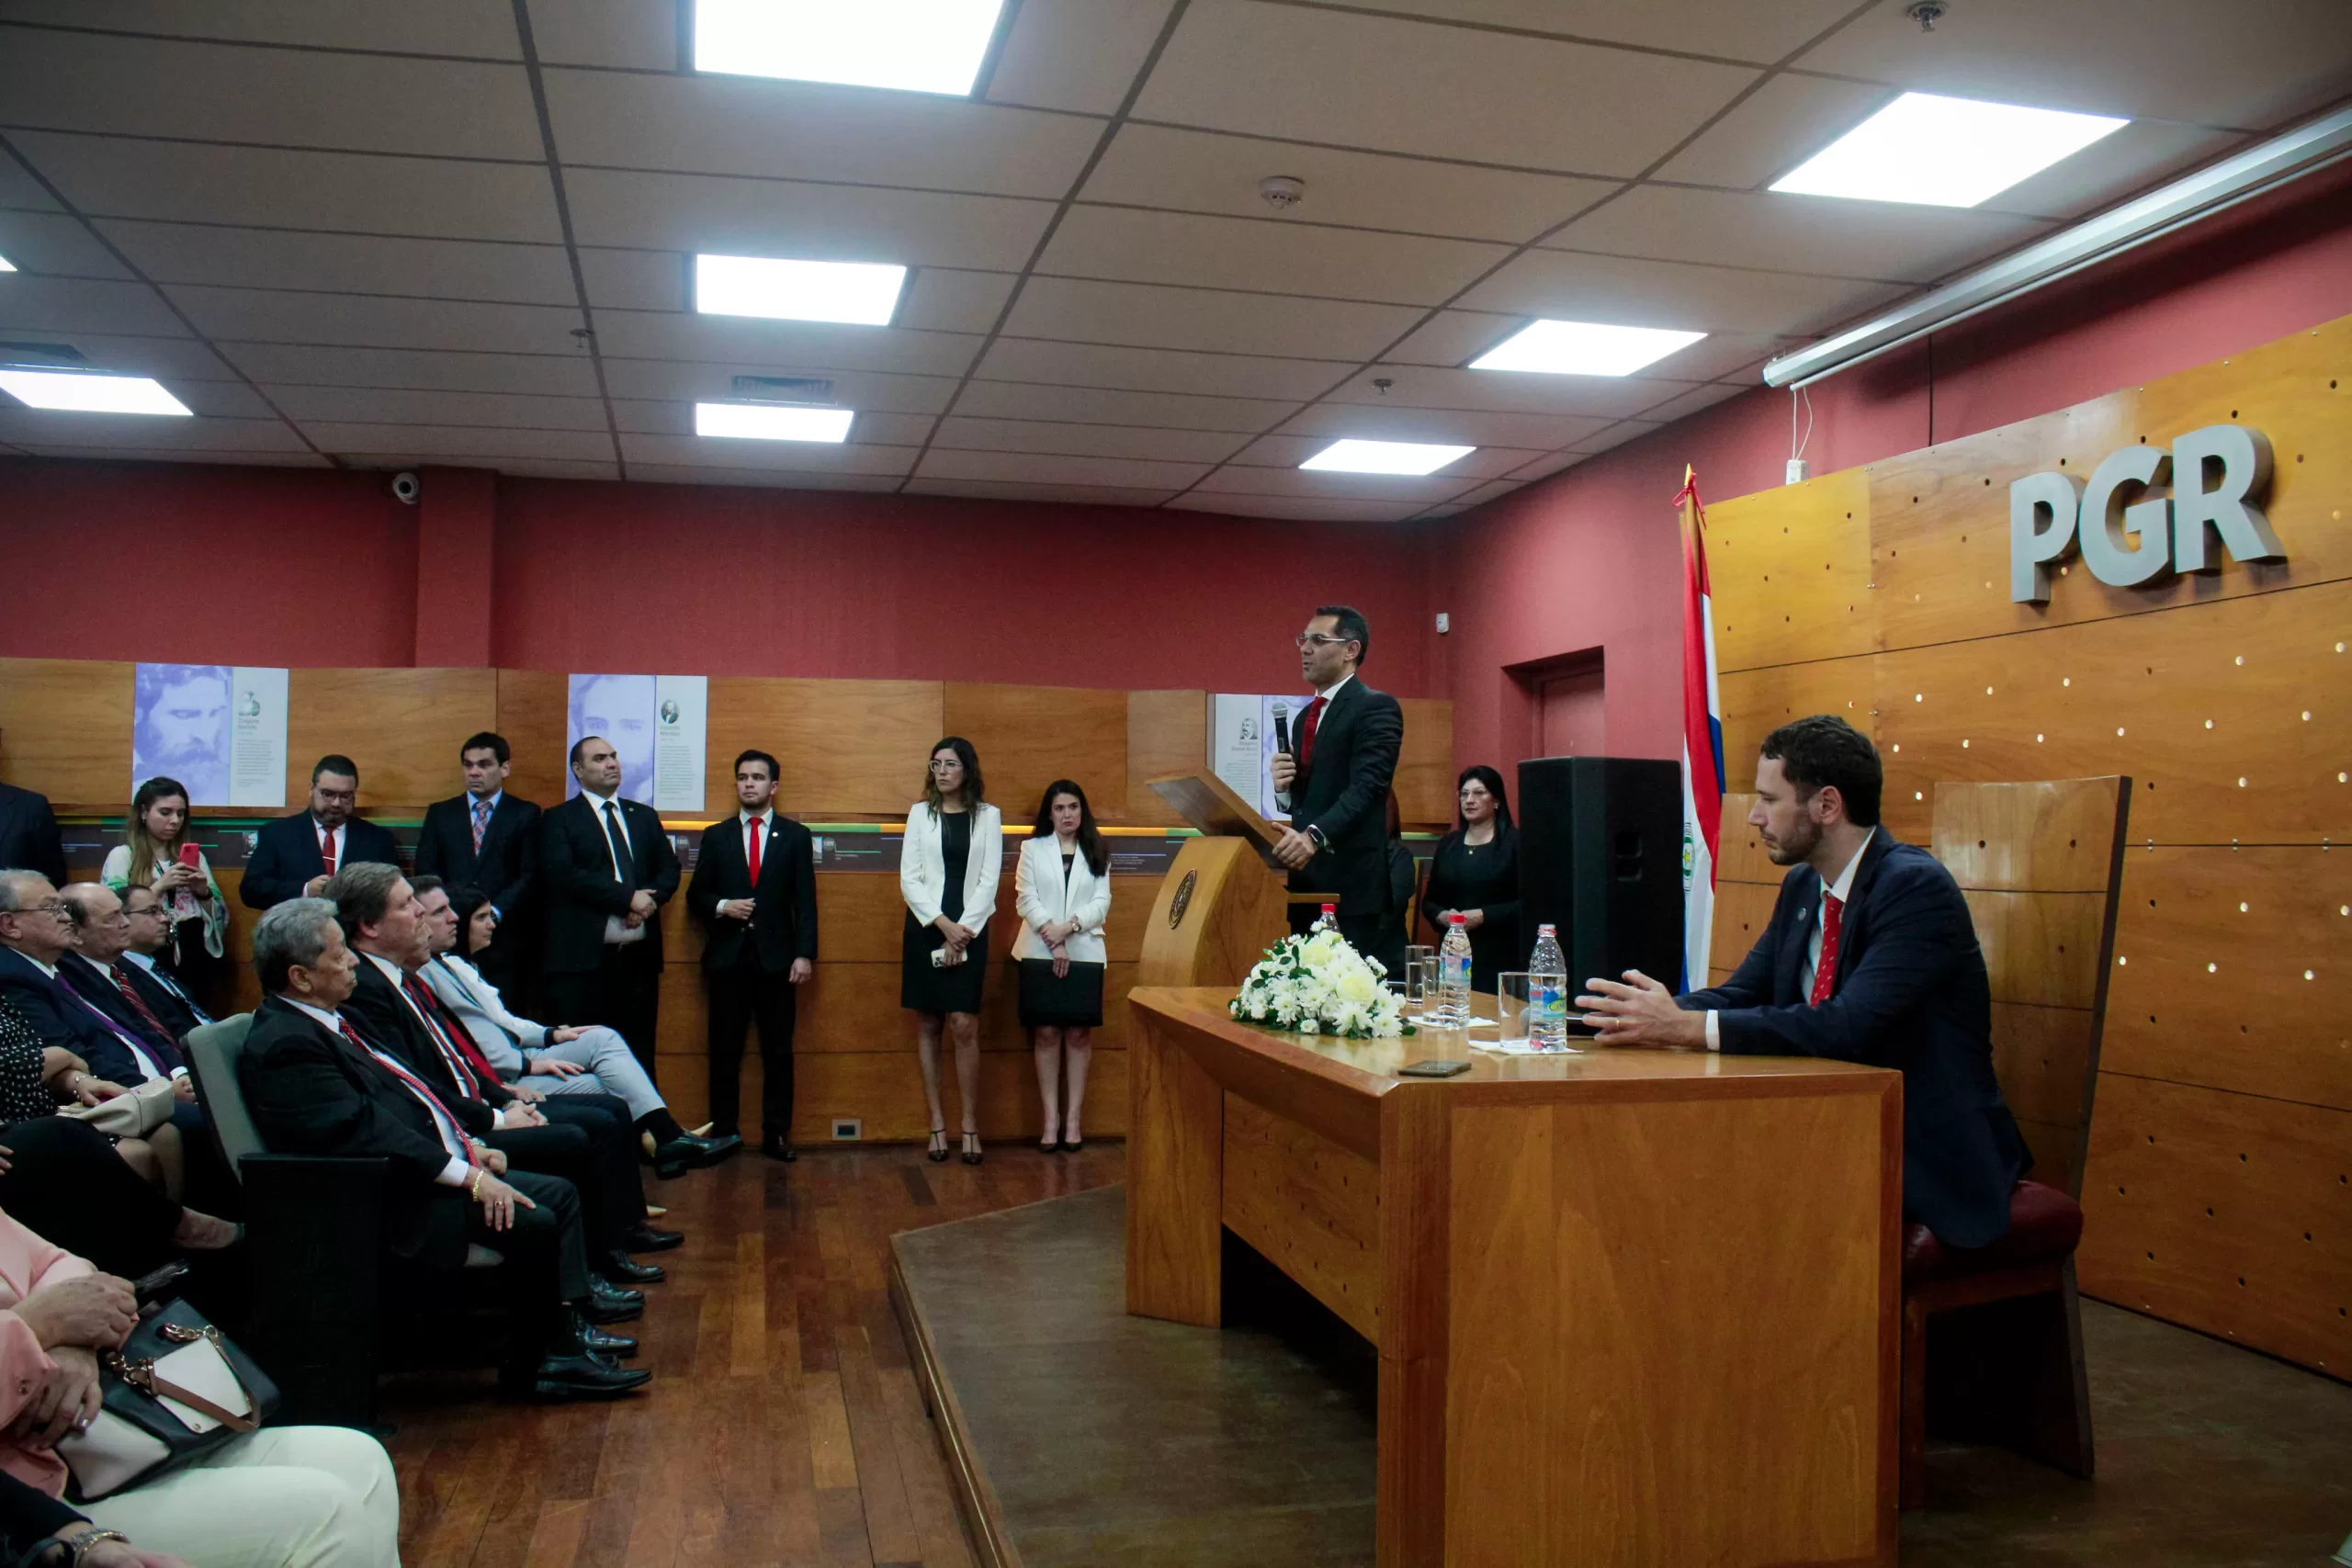 The new attorney takes office with the commitment to "defend the patrimony" of the Republic
